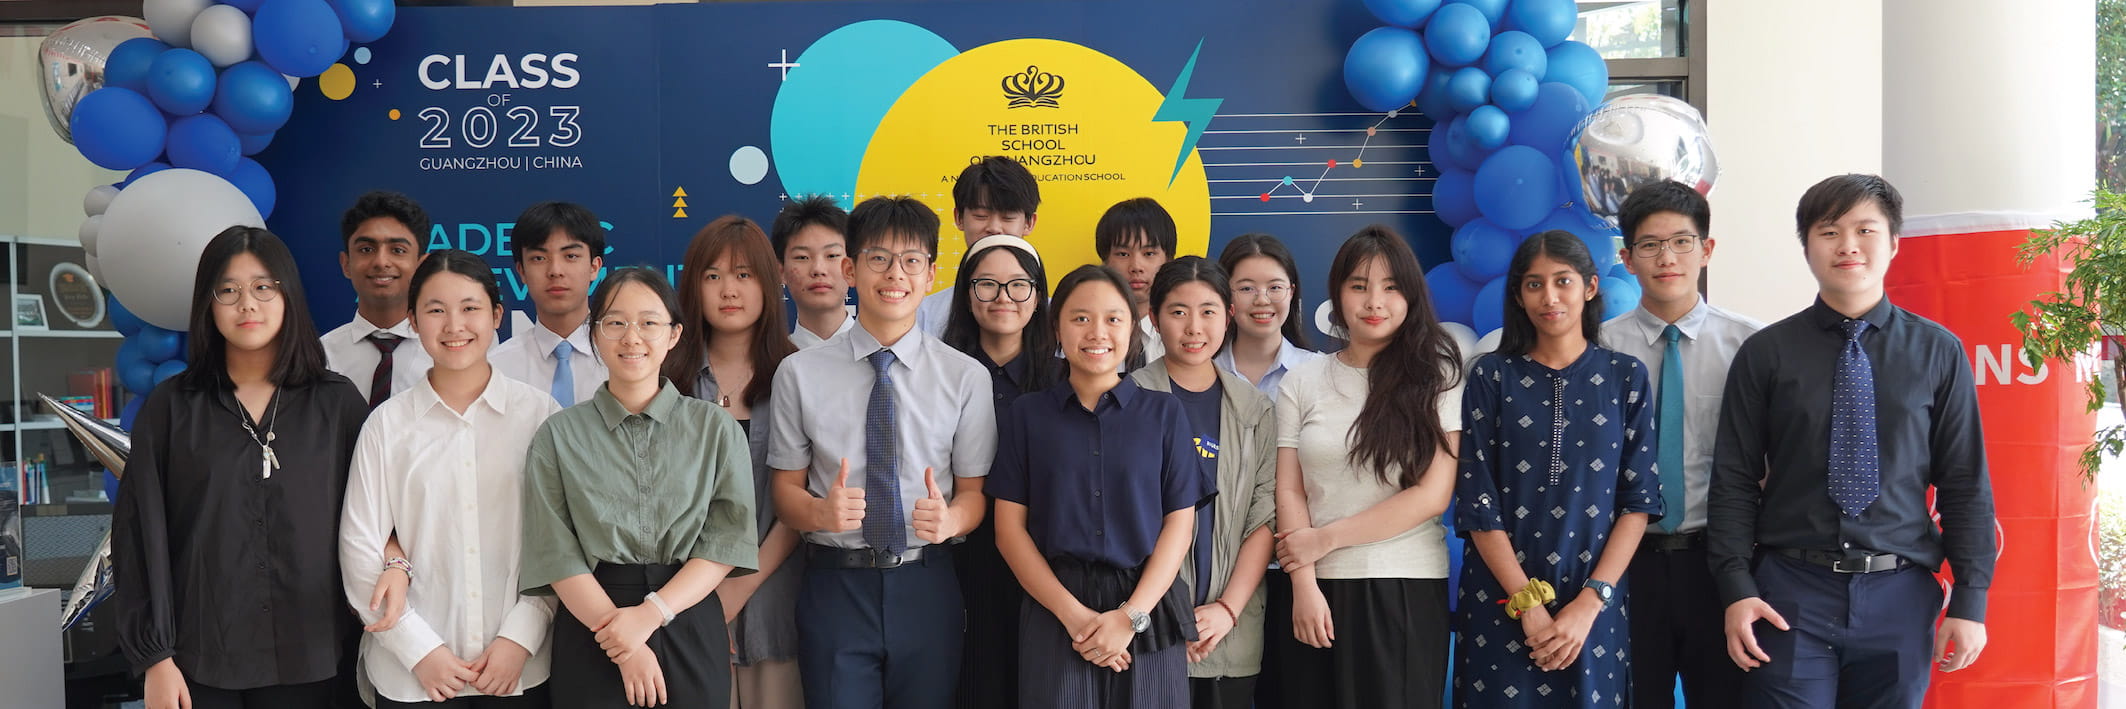 Students Say | The British School of Guangzhou - Content Page Header